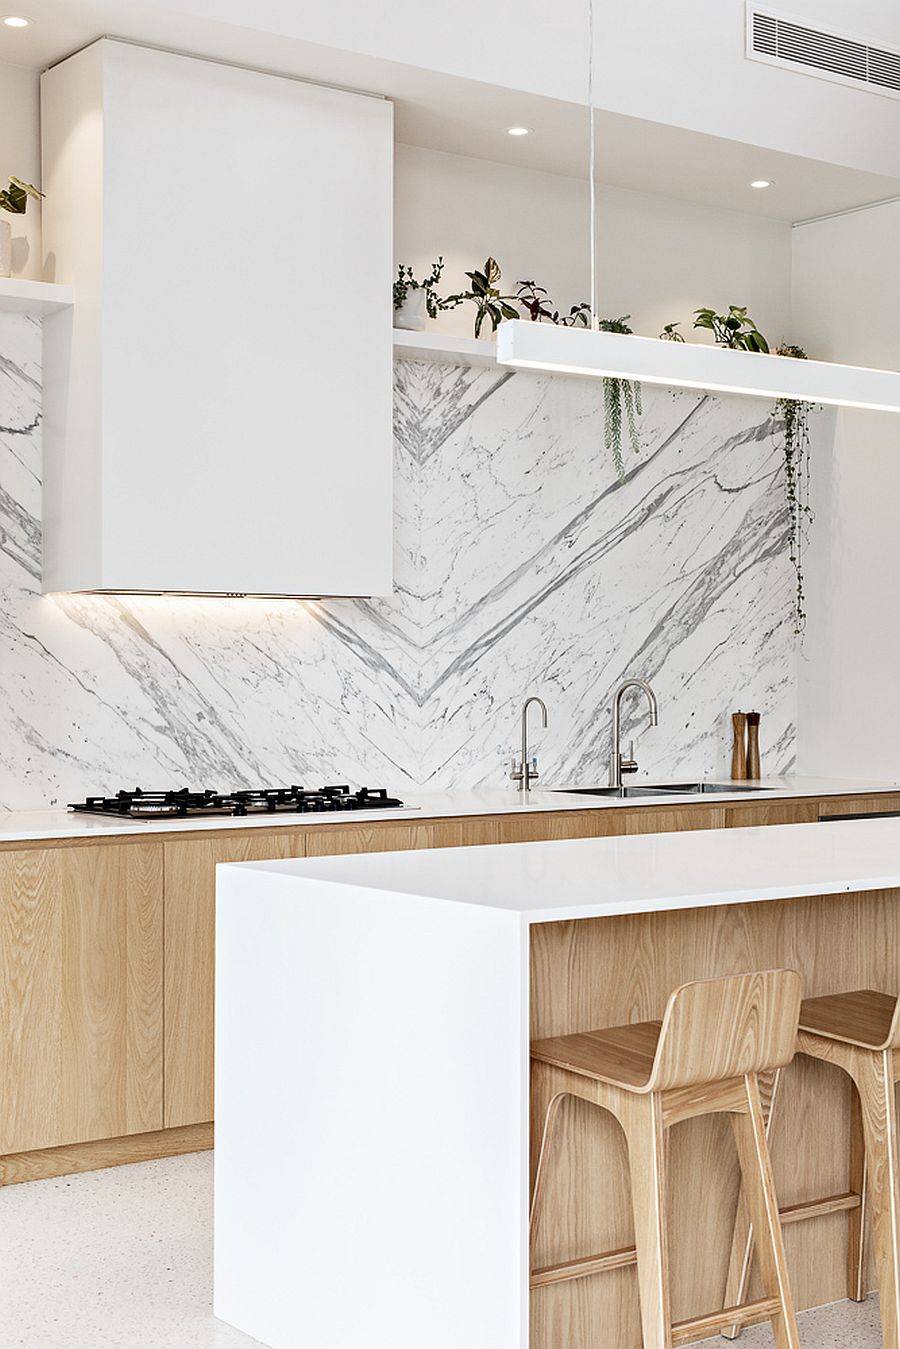 Custom-minimal-hood-and-range-for-the-sleek-contemporary-kitchen-in-white-and-wood-29025